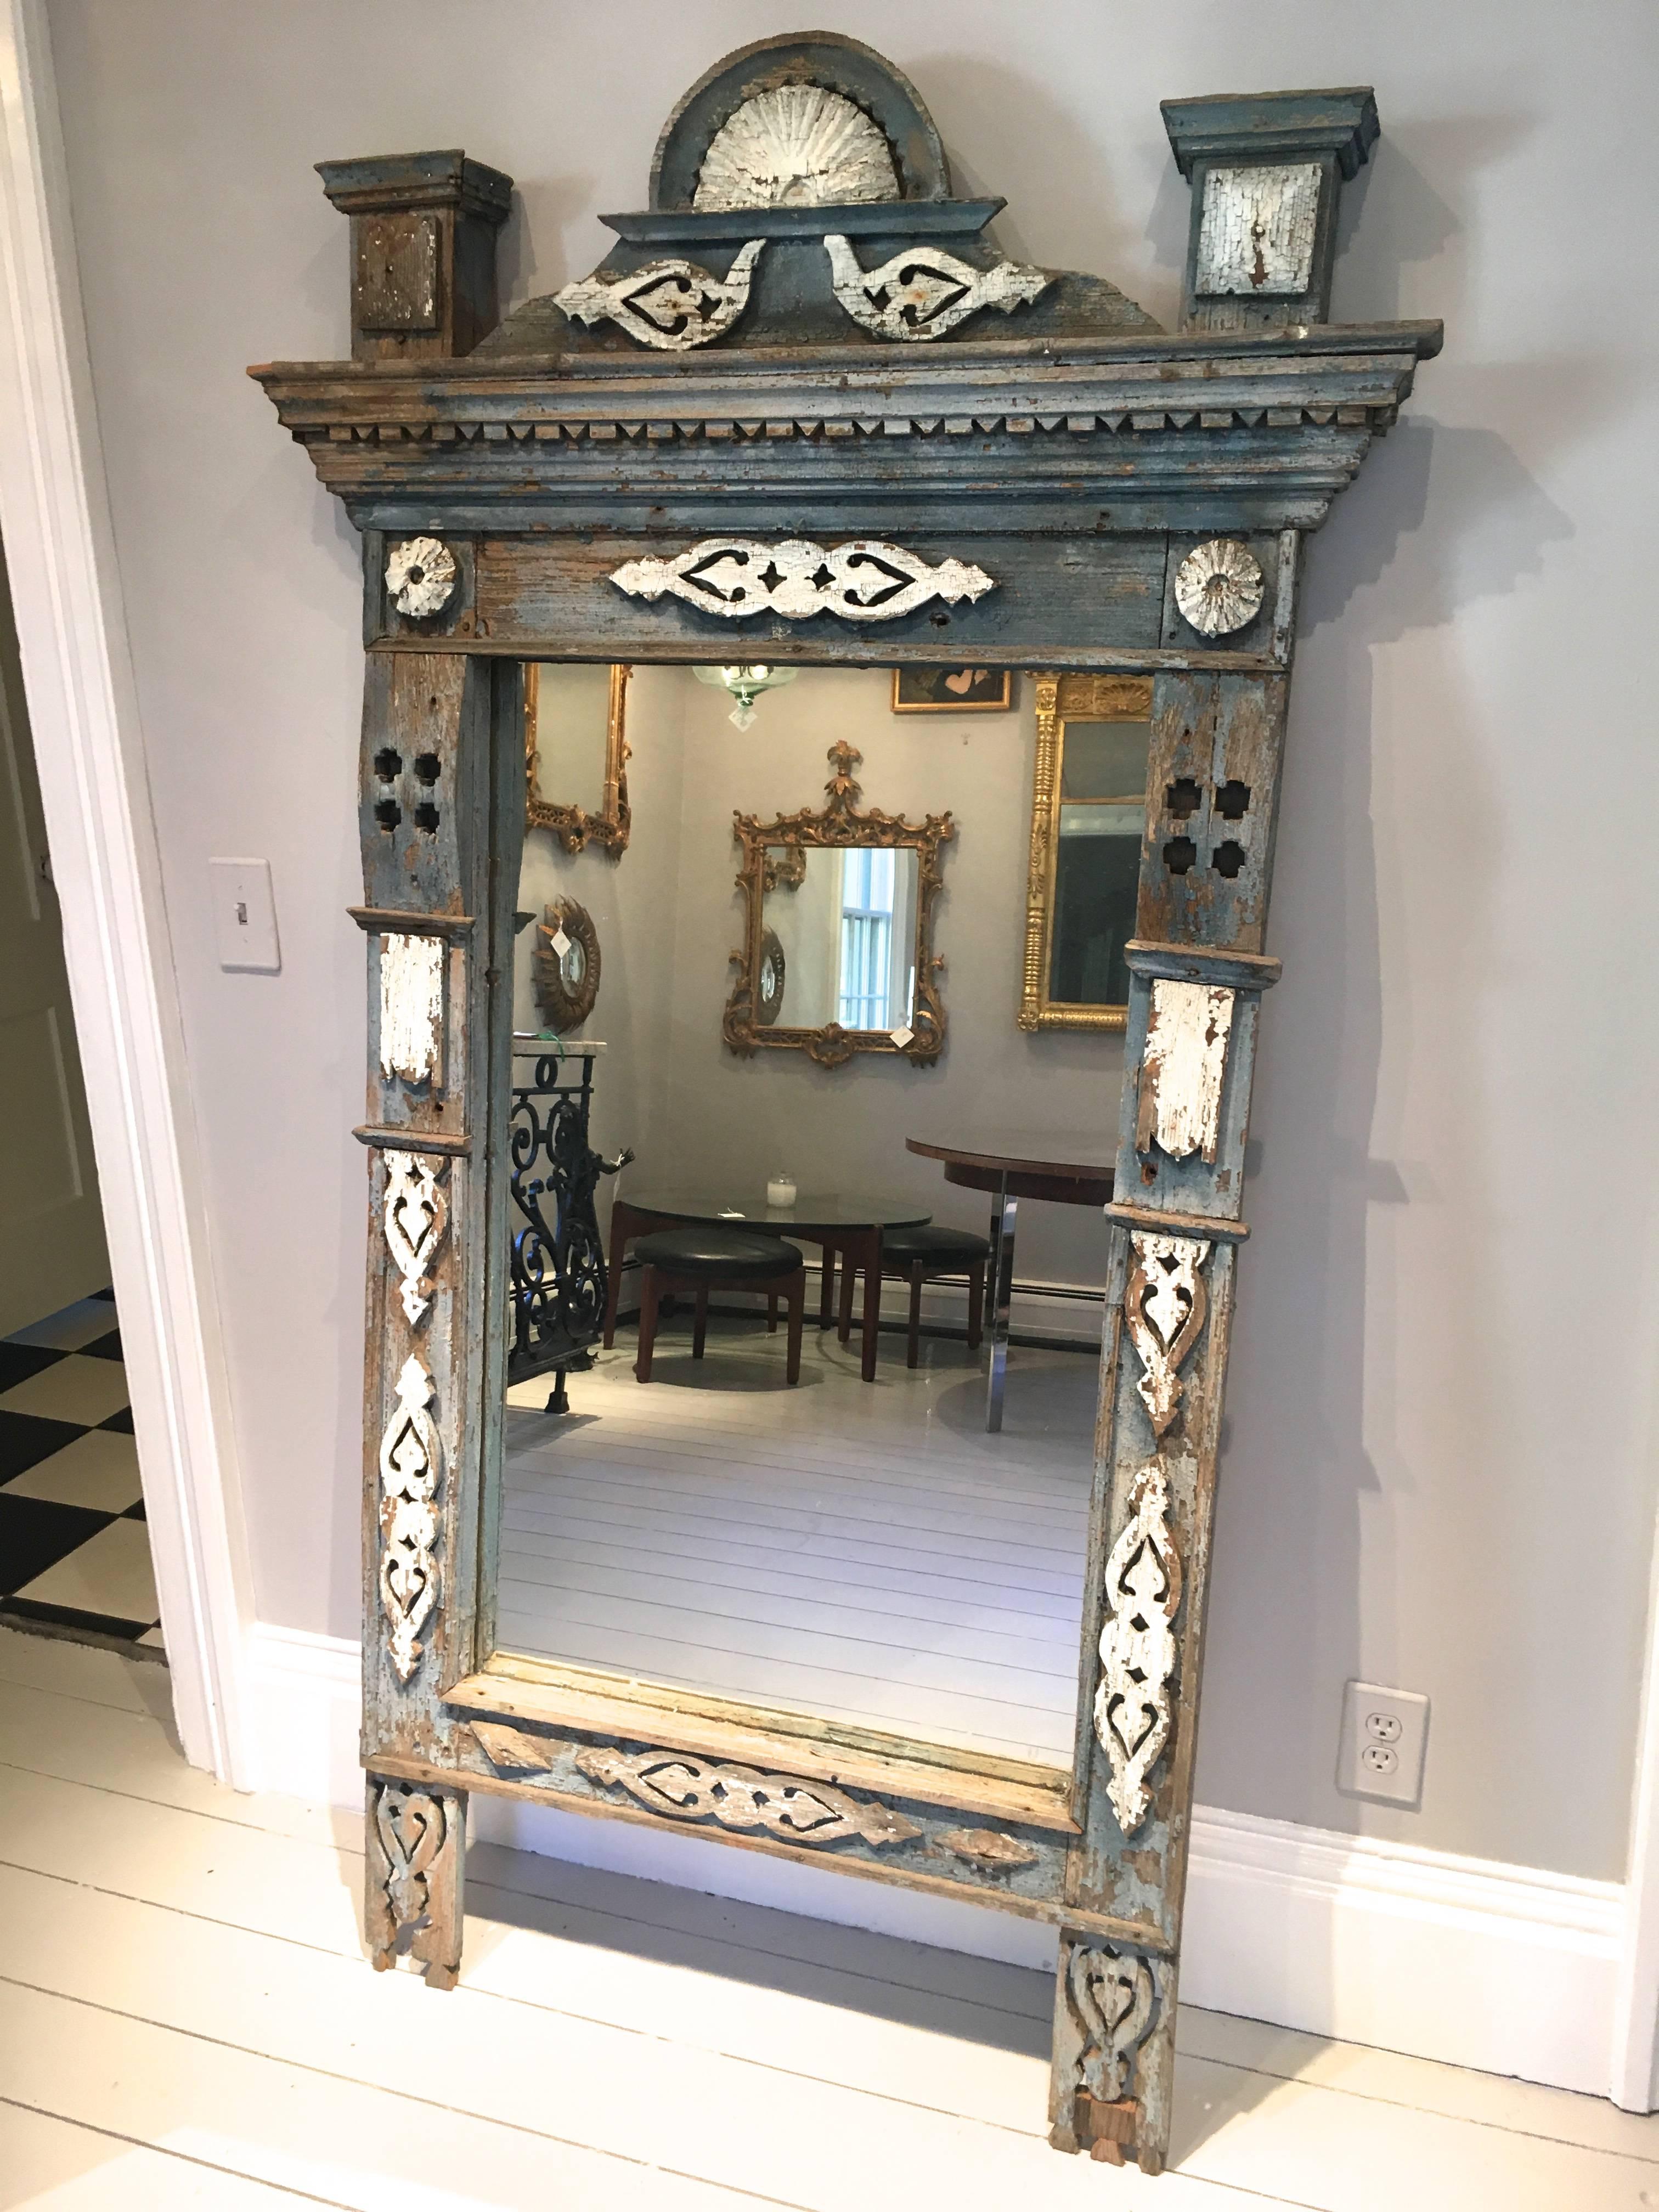 This gorgeous painted wooden frame has appliquéd doves, a center demilune, corner rosettes and additional decoration to the solid pine frame. The color is a stunning faded blue with minor areas where the original wood shows through and the white